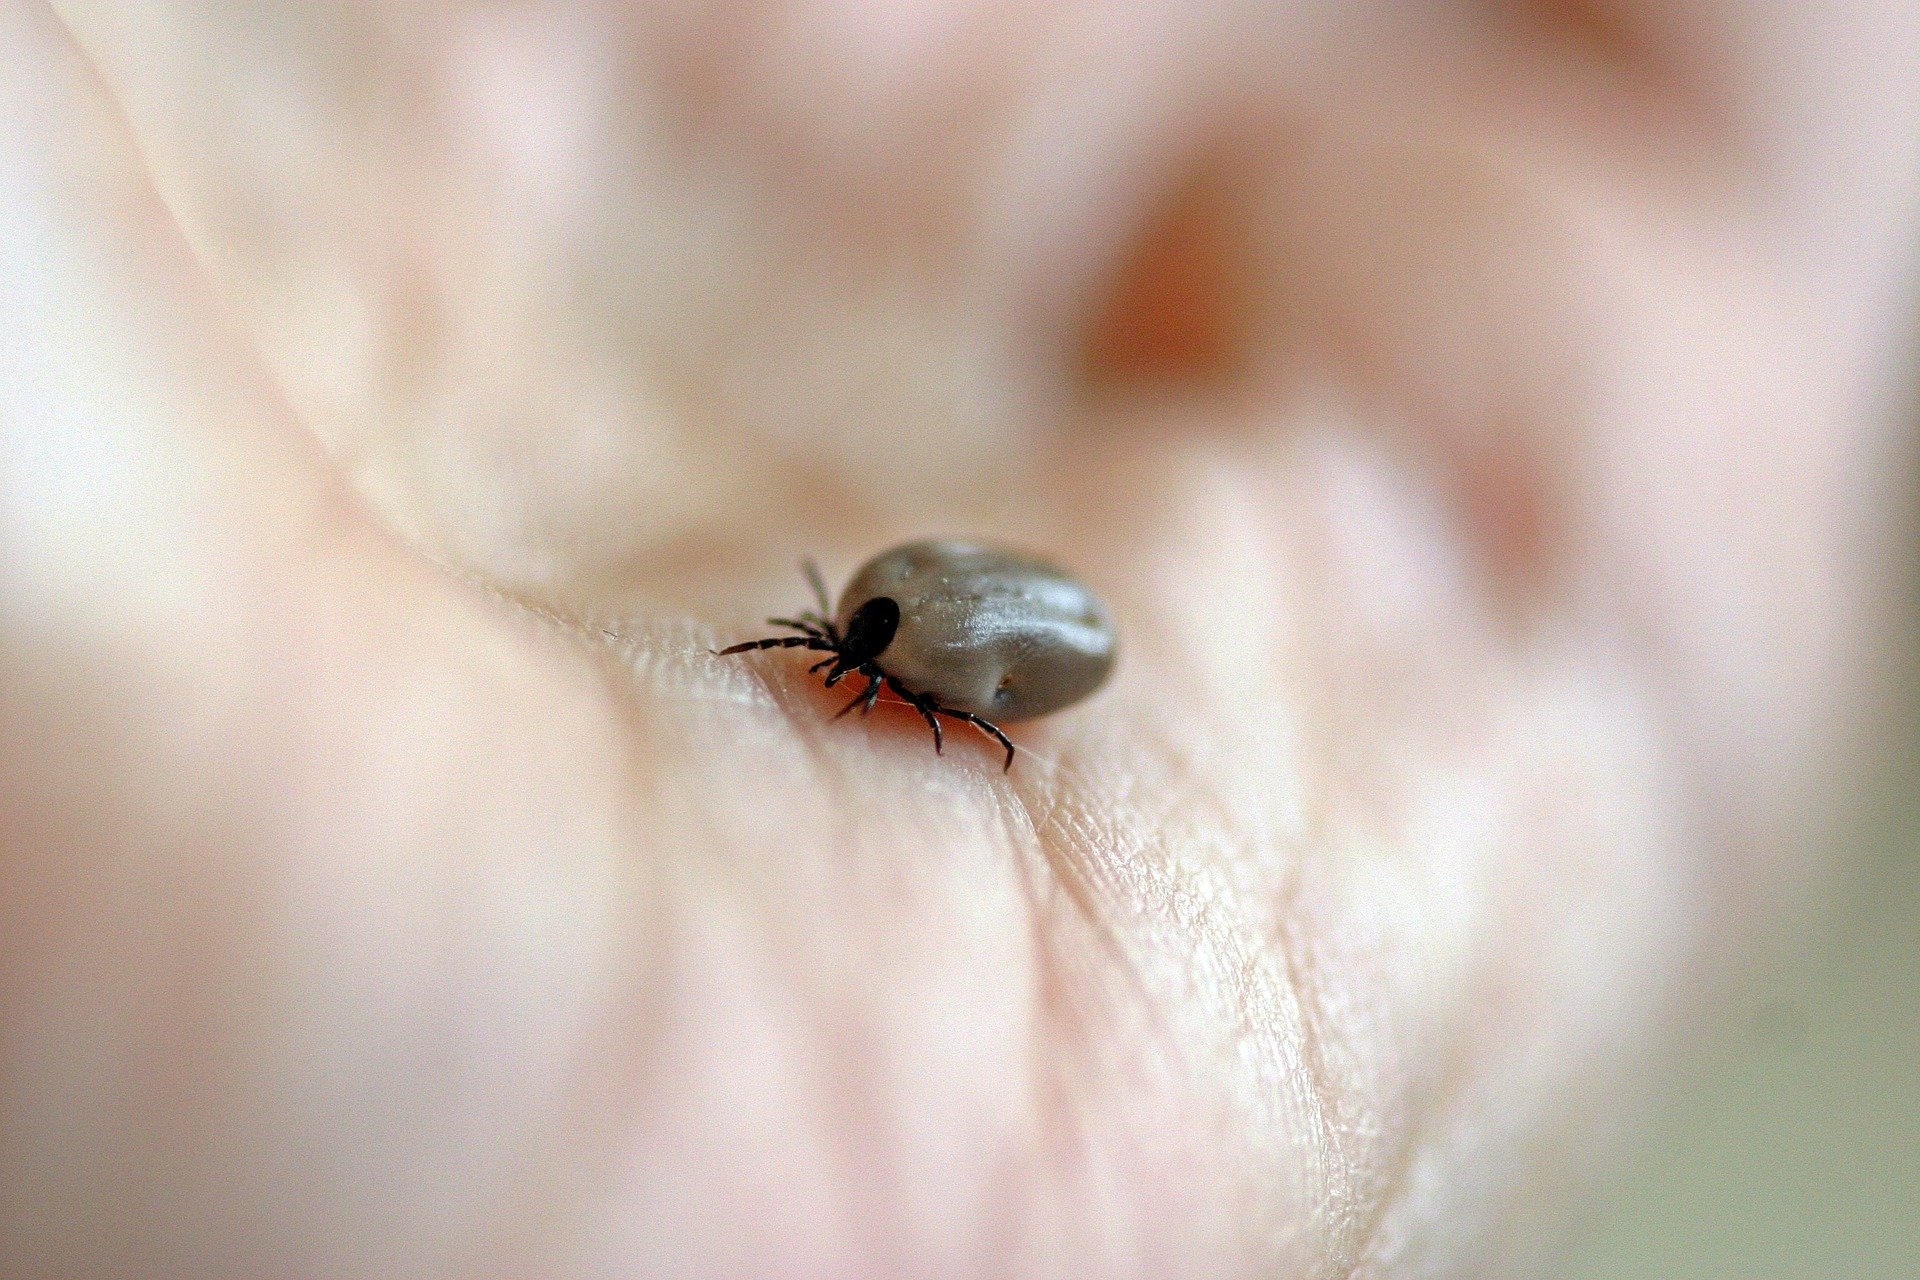 Pictured - Tick, a blood sucker on a person's hand | Source: Pixabay 